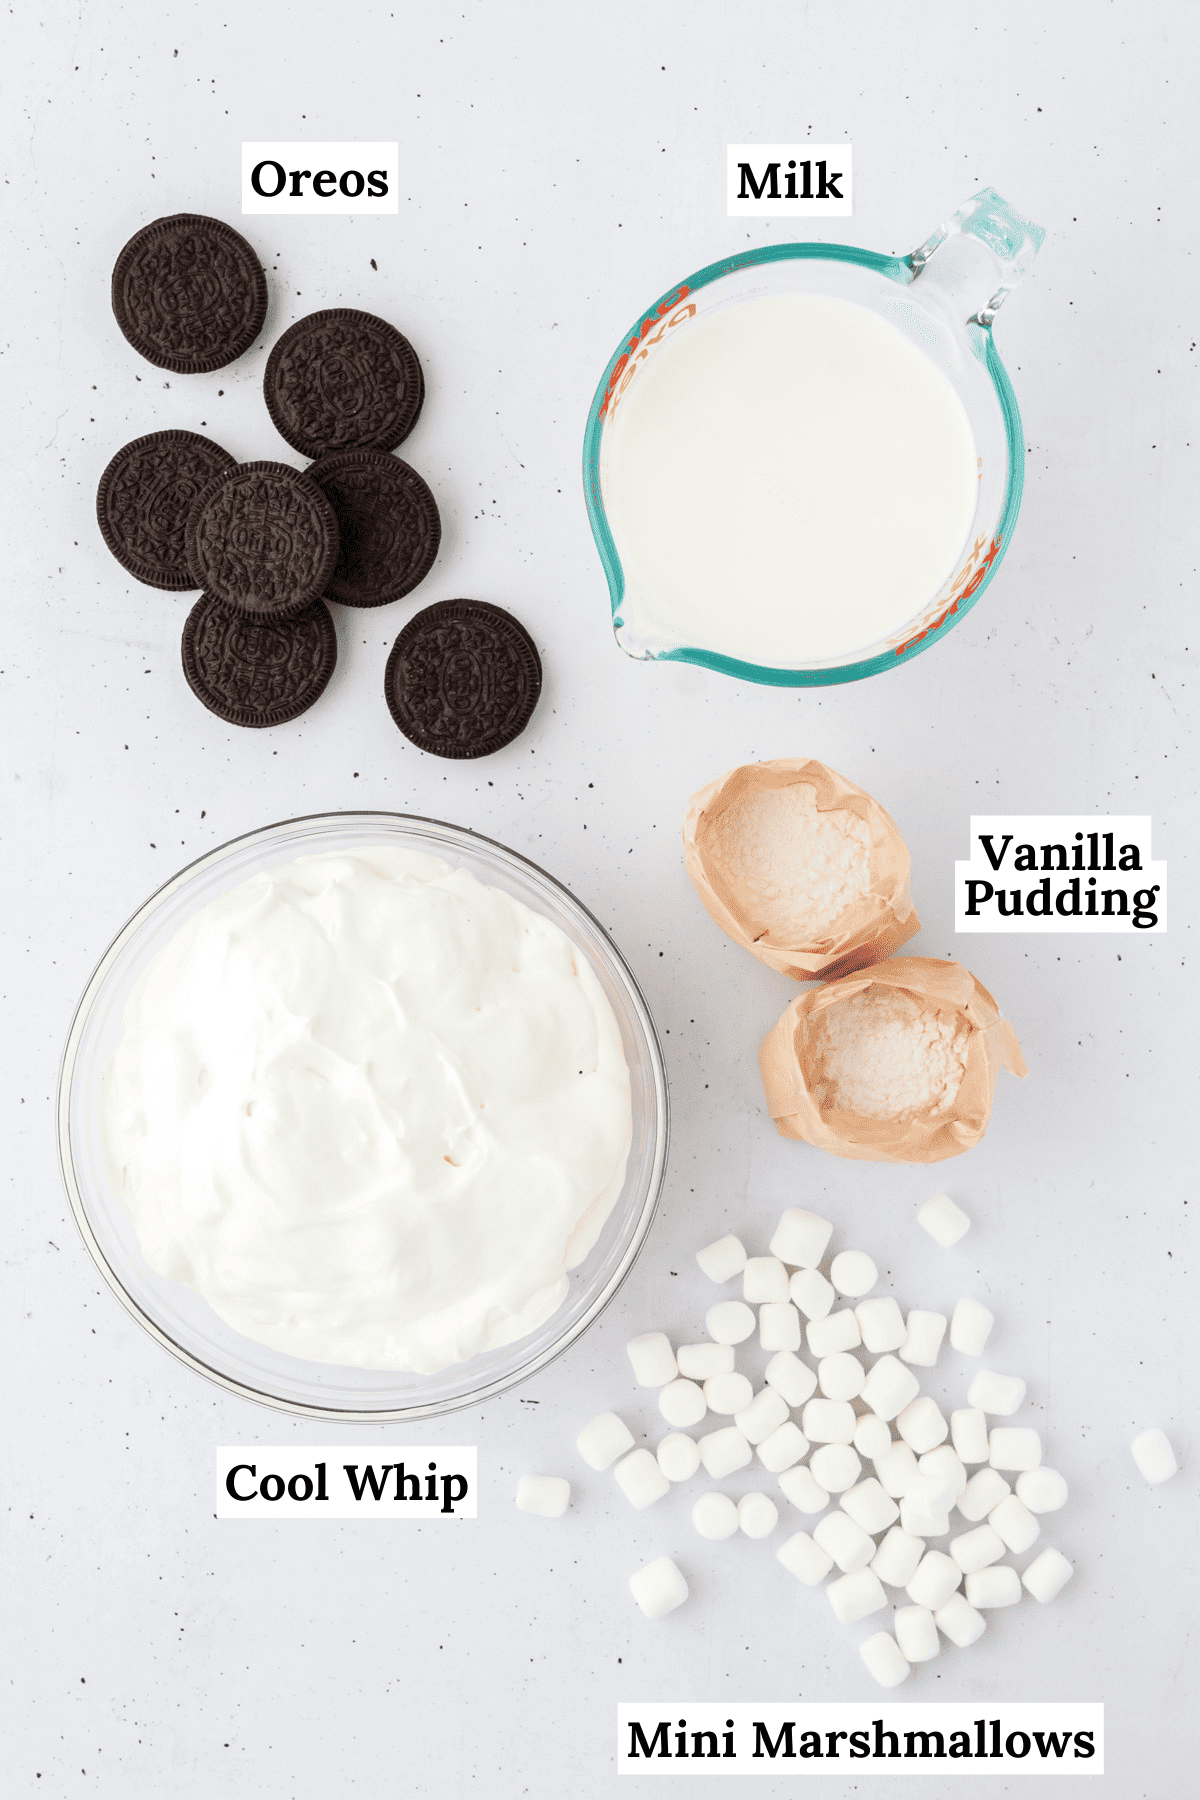 ingredients for oreo fluff laid out on a white surface including vanilla pudding mix, milk, cool whip, oreos, and mini marshmallows